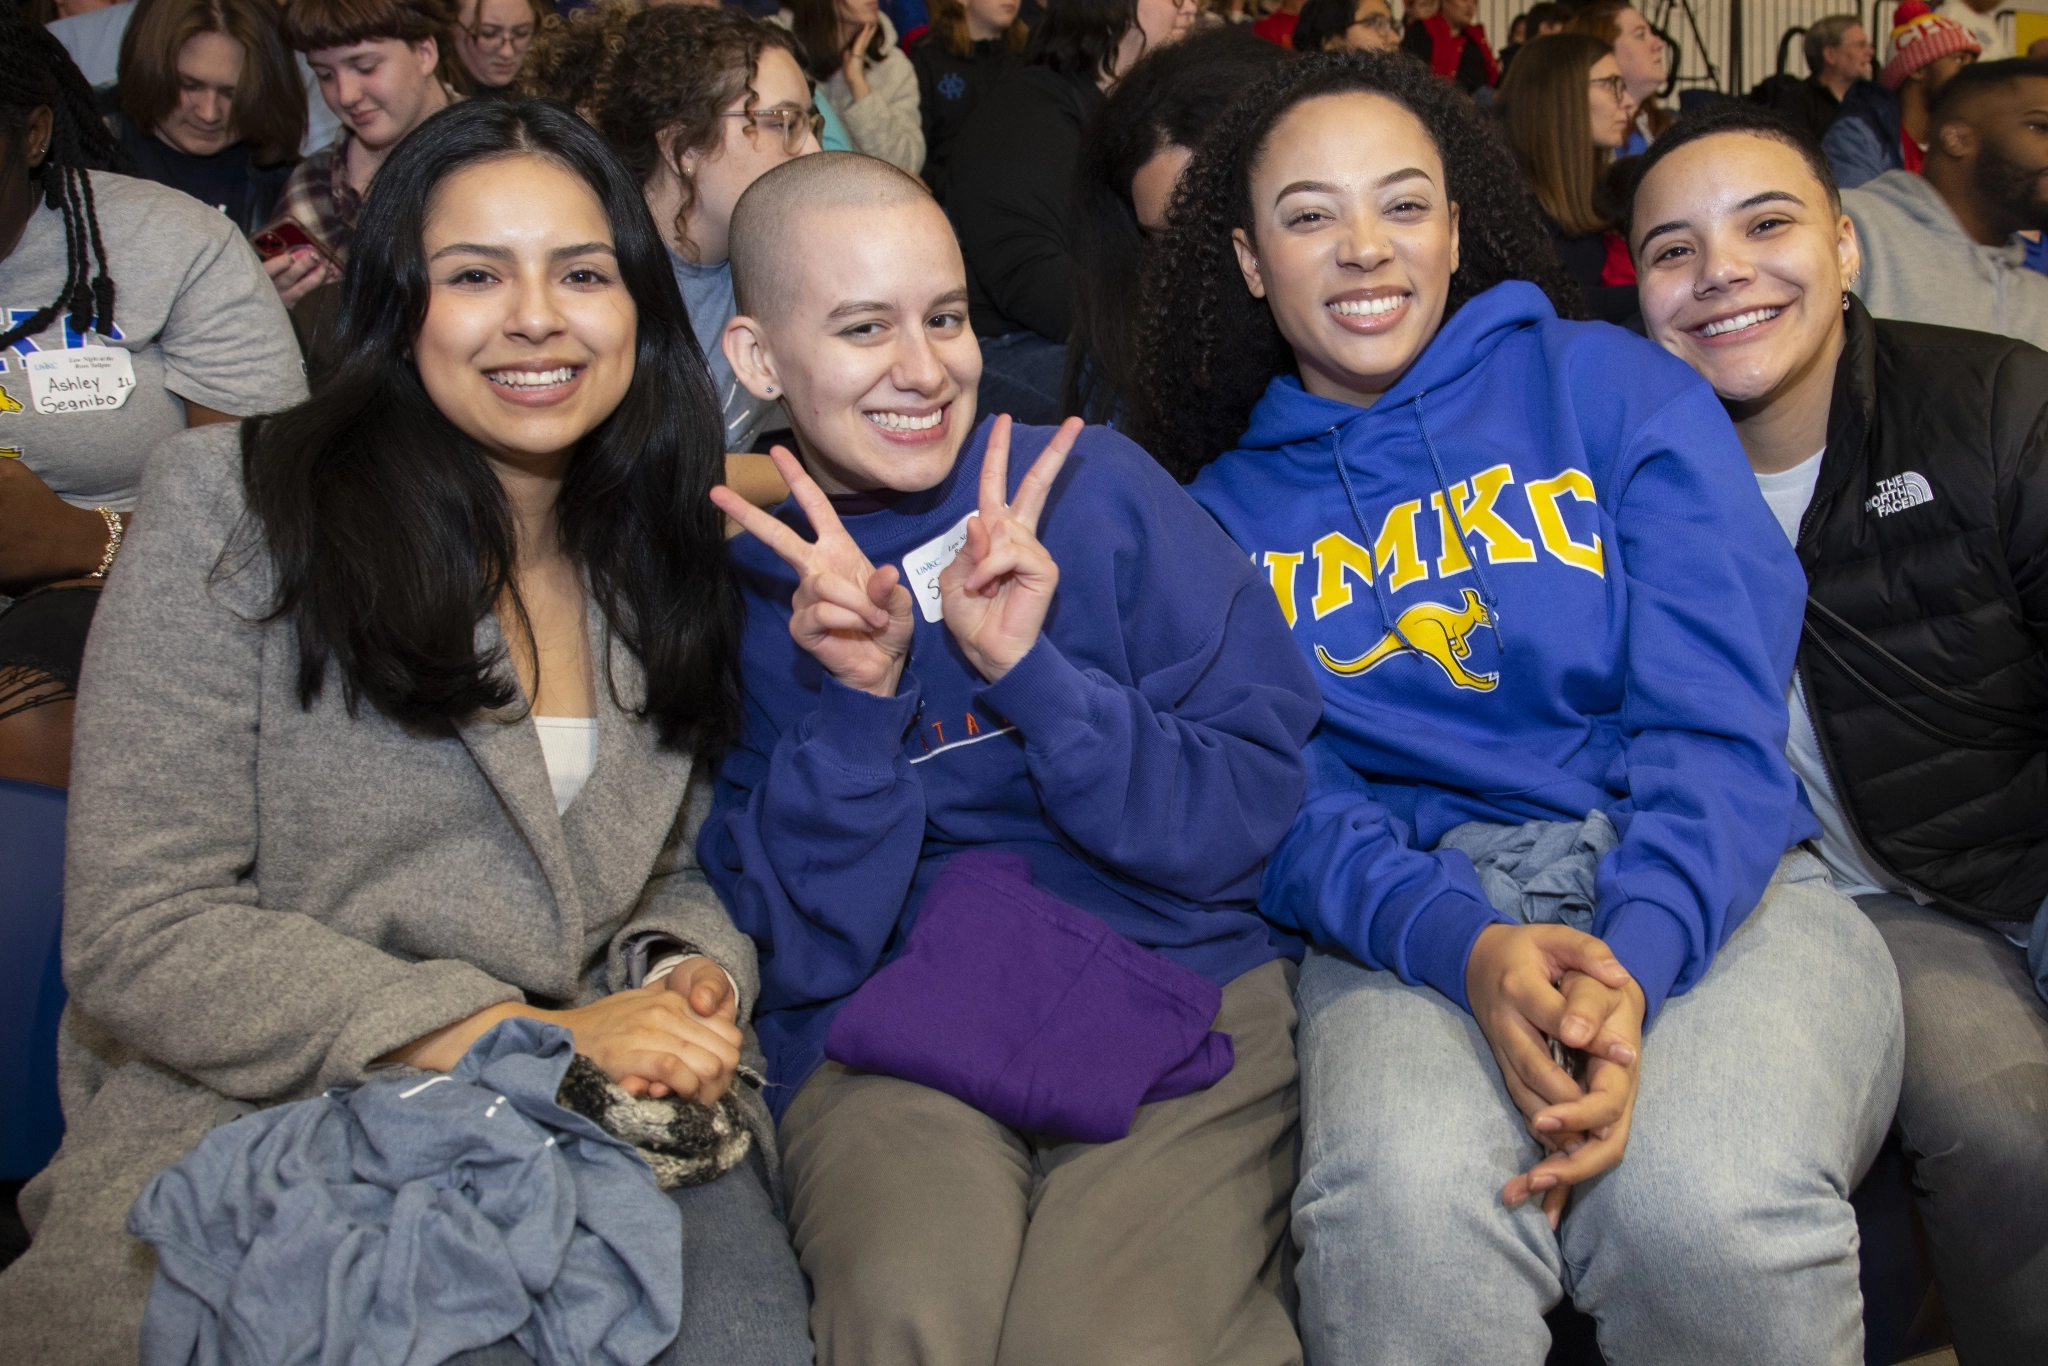 Four students pose for photo. One student second from left holds up peace signs. The person to their right is wearing a UMKC shirt.